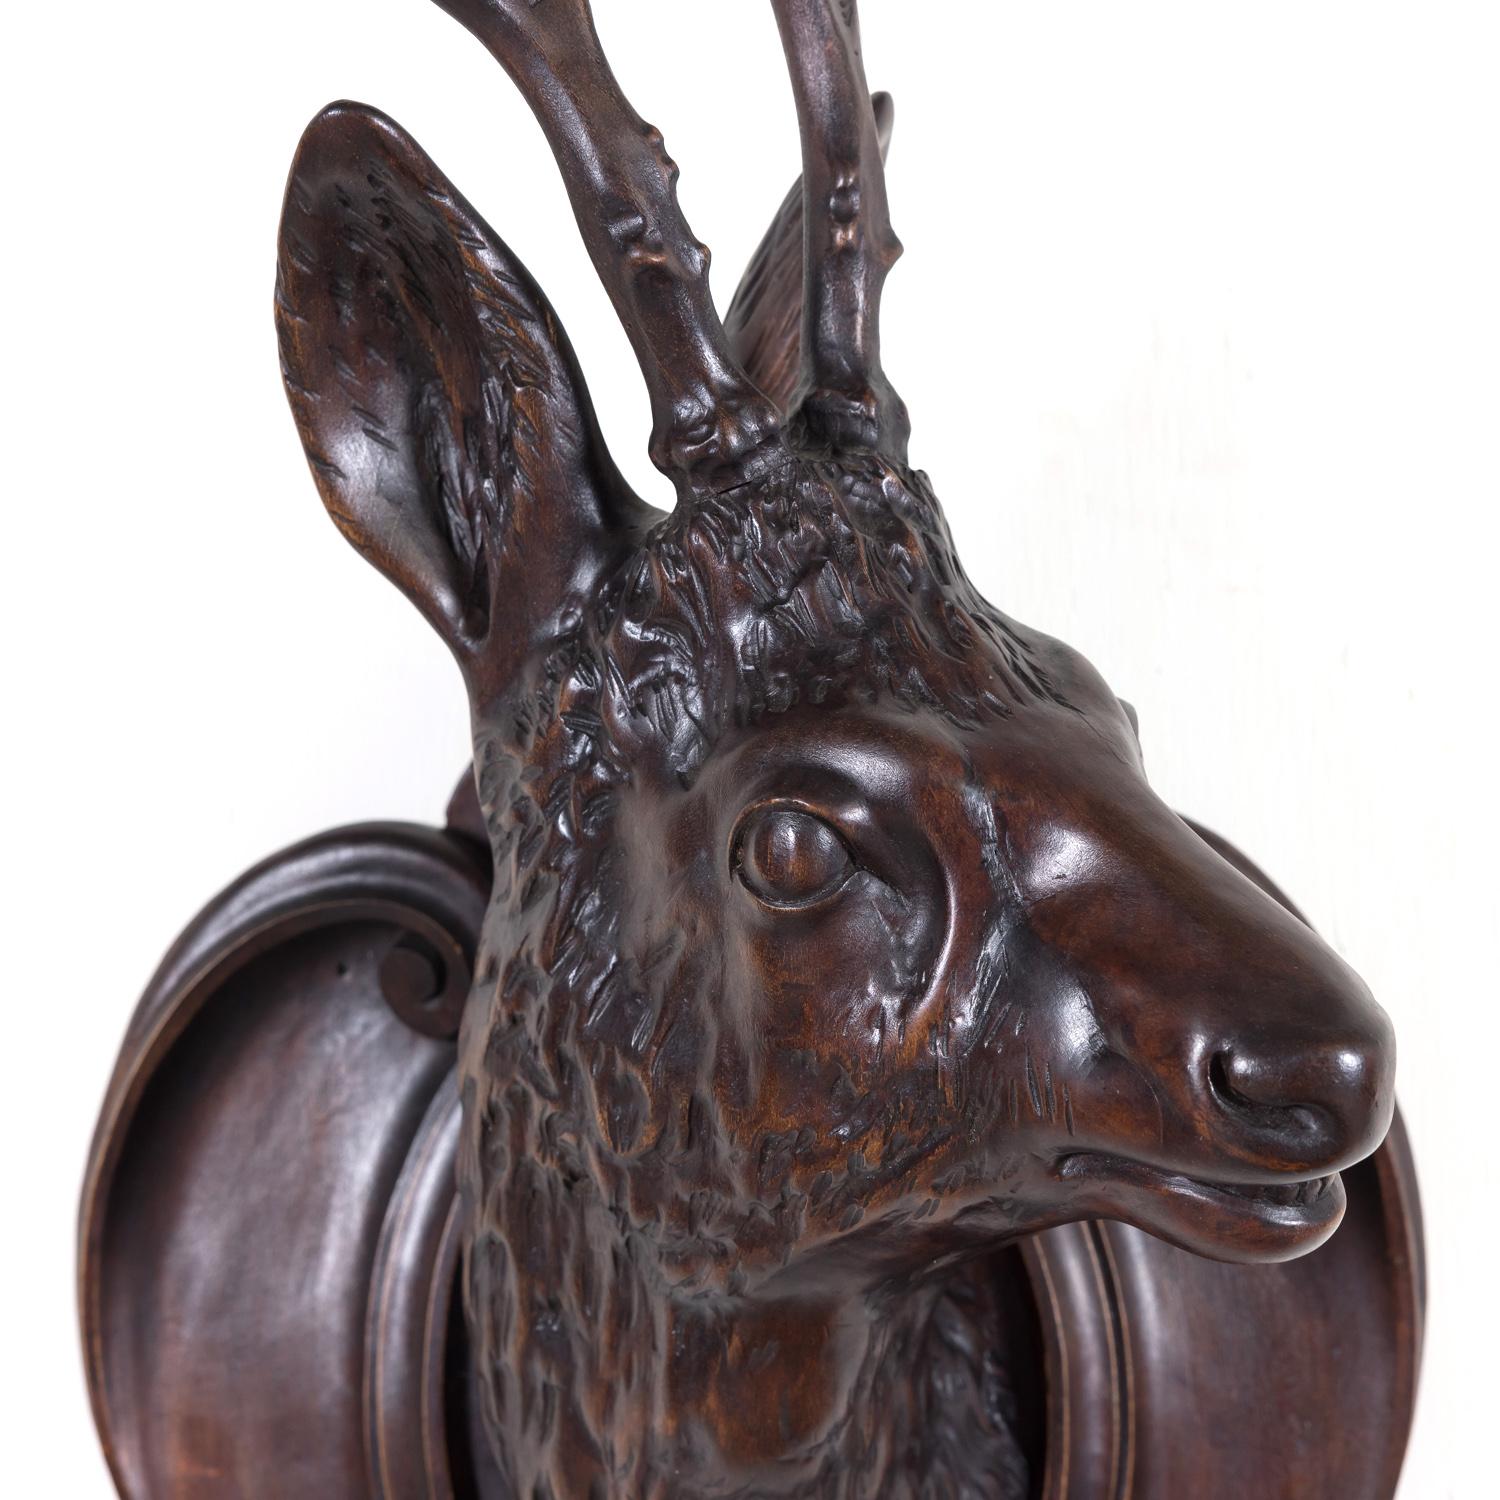 A fantastic antique French Black Forest carved wooden trophy plaque depicting an intricately hand carved solid walnut six point buck or stag head with carved antlers mounted on a carved cartouche or shield, circa 1890s. The quality of execution and